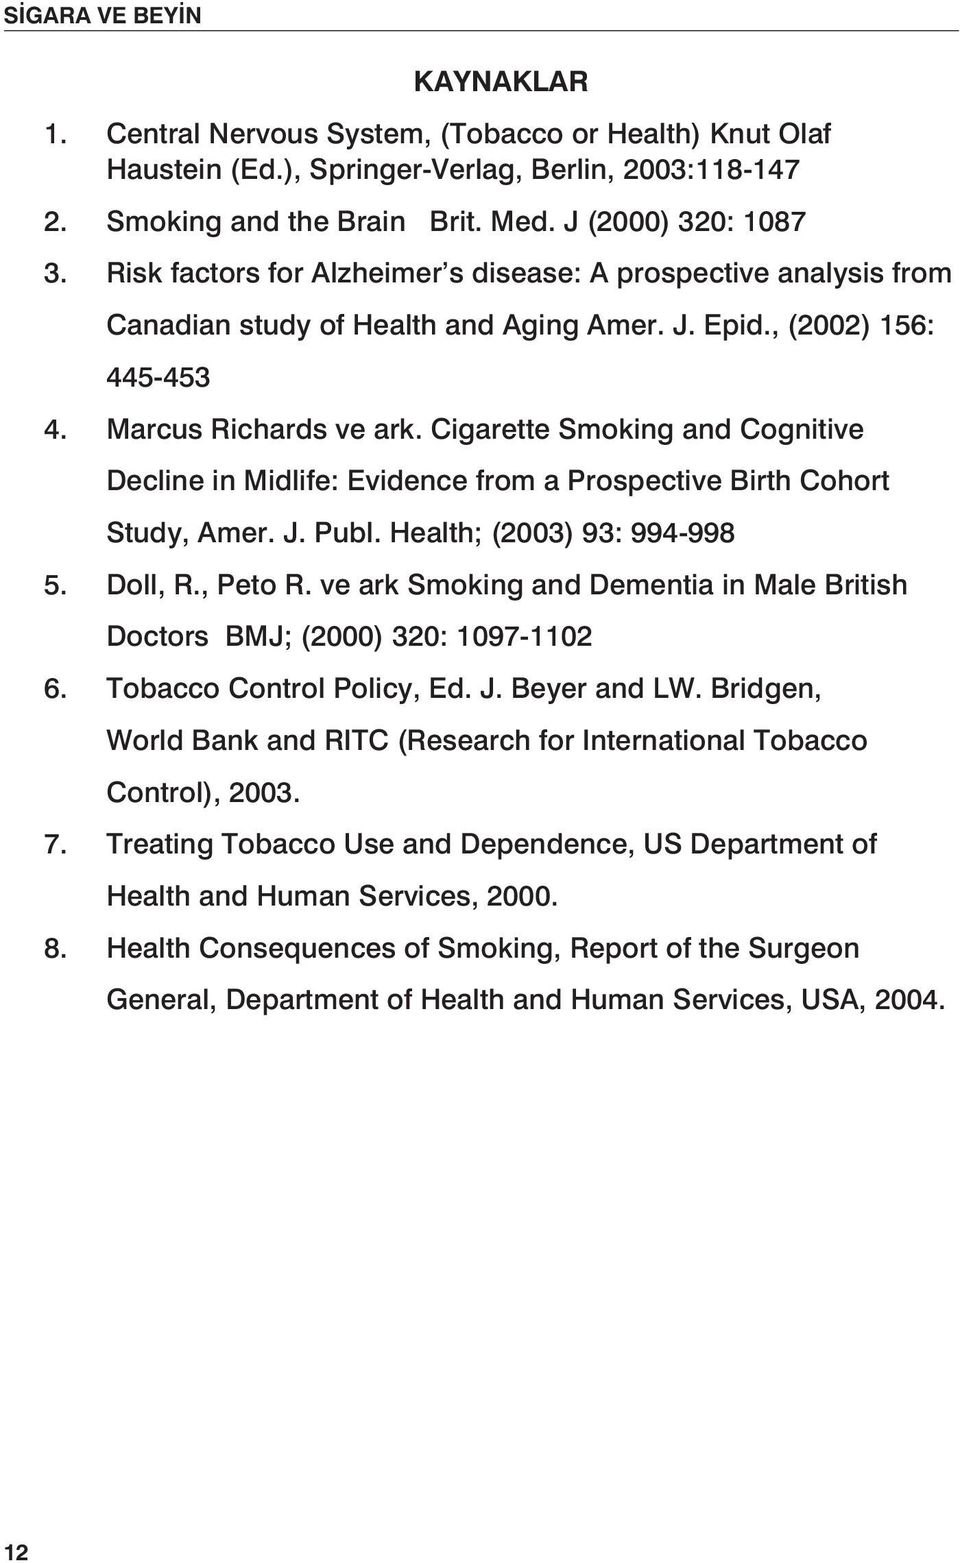 Cigarette Smoking and Cognitive Decline in Midlife: Evidence from a Prospective Birth Cohort Study, Amer. J. Publ. Health; (2003) 93: 994-998 5. Doll, R., Peto R.